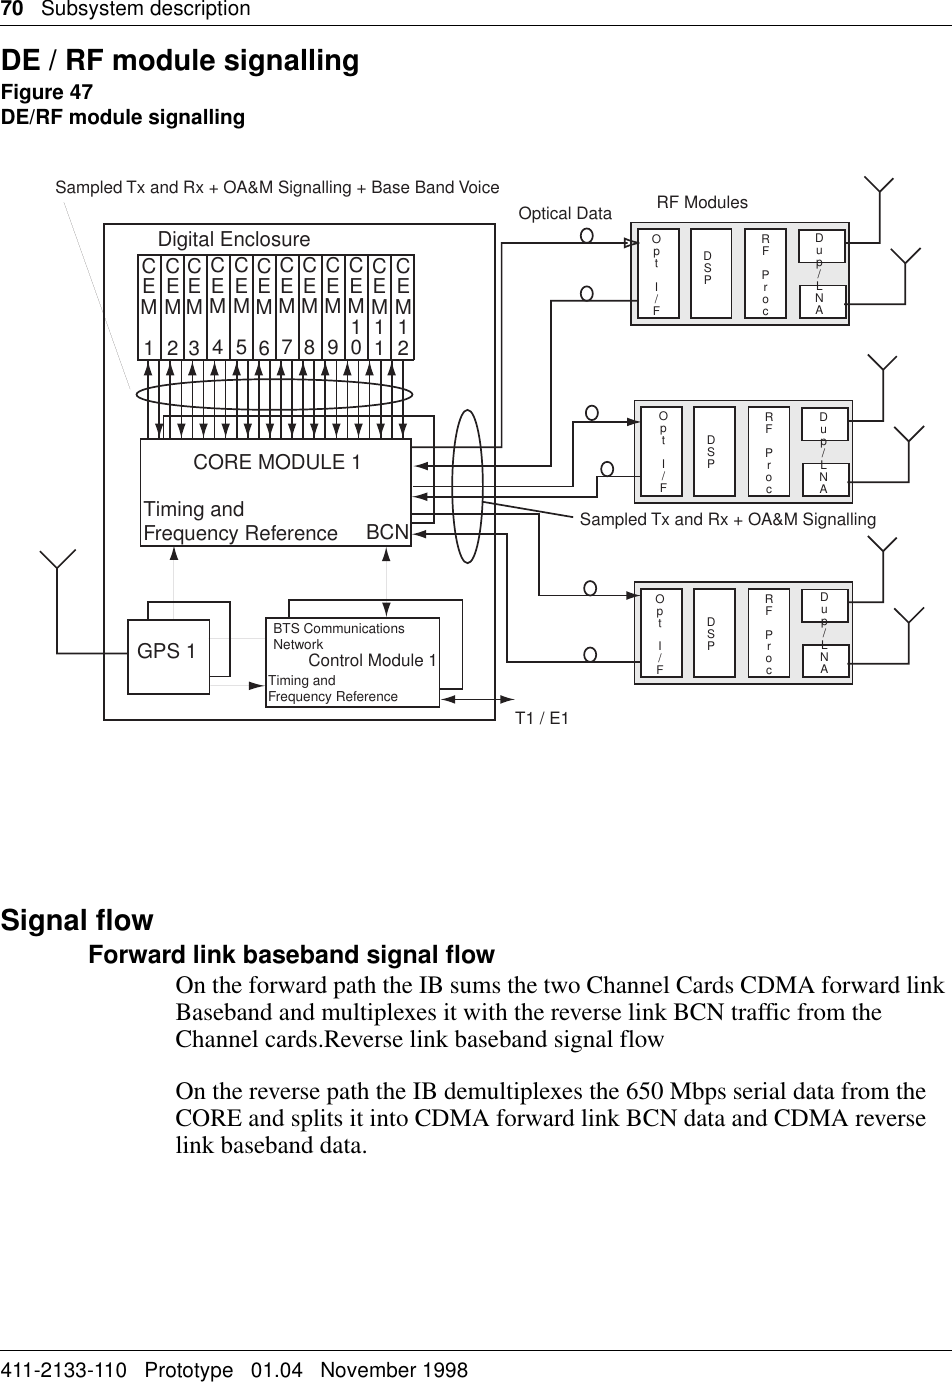 70   Subsystem description411-2133-110   Prototype   01.04   November 1998DE / RF module signallingFigure 47DE/RF module signallingSignal flowForward link baseband signal flowOn the forward path the IB sums the two Channel Cards CDMA forward link Baseband and multiplexes it with the reverse link BCN traffic from the Channel cards.Reverse link baseband signal flowOn the reverse path the IB demultiplexes the 650 Mbps serial data from the CORE and splits it into CDMA forward link BCN data and CDMA reverse link baseband data.Digital EnclosureCEM 1CEM 2CEM 3CEM 4CEM 5CEM 6CEM 7CEM 8CEM 9CEM10CEM11CEM12CORE MODULE 1Timing andFrequency Reference BCNGPS 1BTS CommunicationsNetworkTiming andFrequency ReferenceControl Module 1Sampled Tx and Rx + OA&amp;M Signalling + Base Band VoiceSampled Tx and Rx + OA&amp;M SignallingT1 / E1RF ModulesOptical DataOpt I/FOpt I/FOpt I/FDSPDSPDSPRF ProcRF ProcRF ProcDup/LNADup/LNADup/LNA